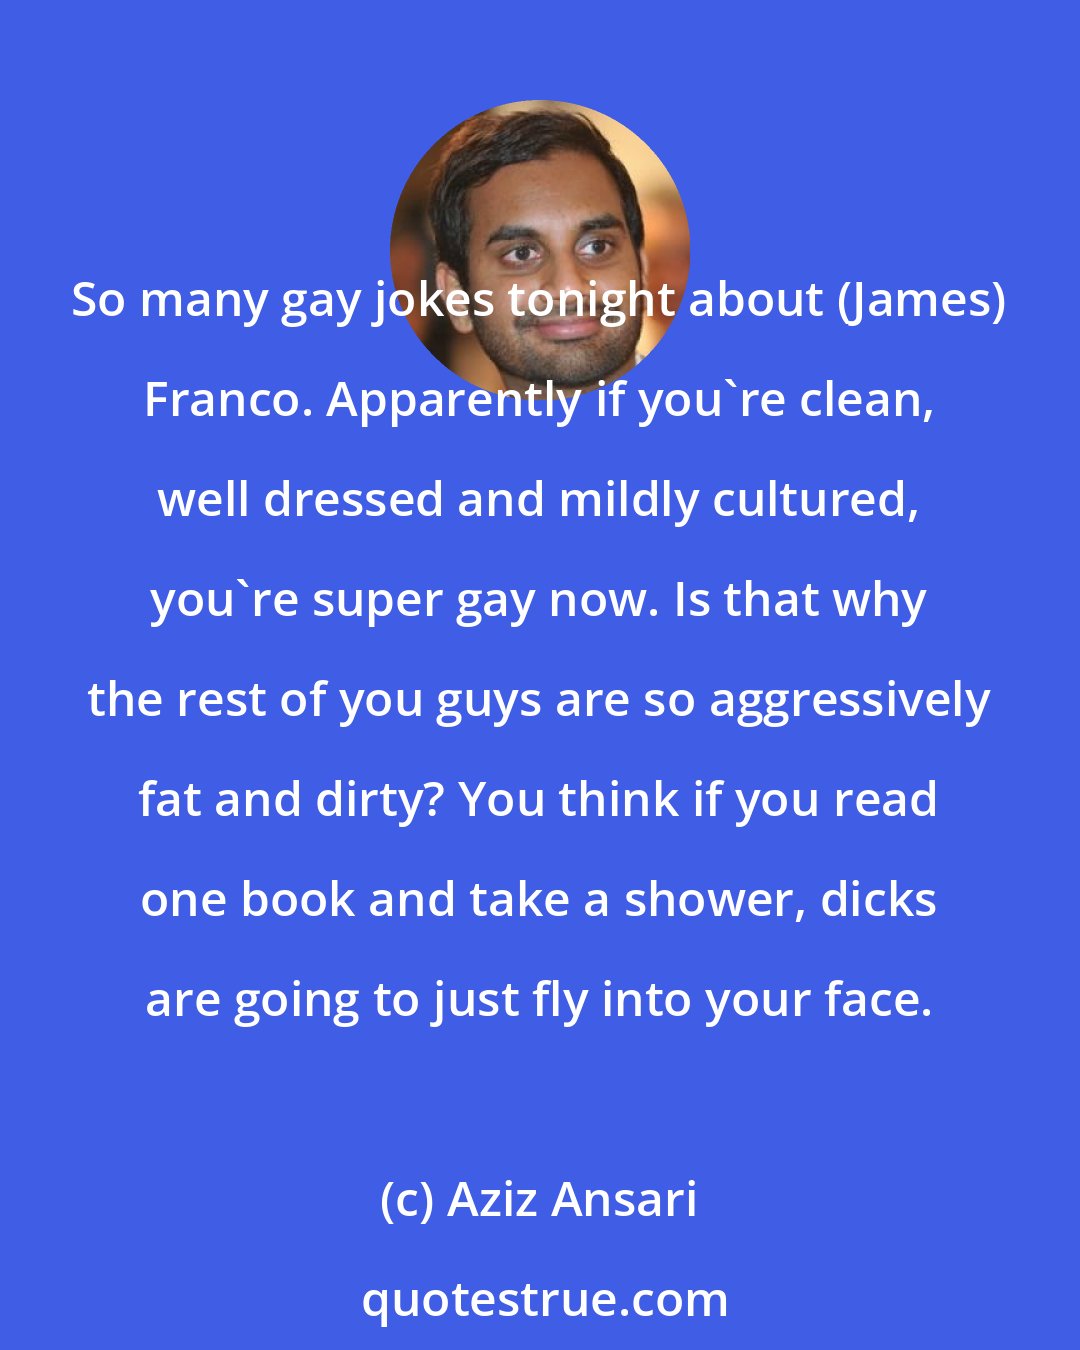 Aziz Ansari: So many gay jokes tonight about (James) Franco. Apparently if you're clean, well dressed and mildly cultured, you're super gay now. Is that why the rest of you guys are so aggressively fat and dirty? You think if you read one book and take a shower, dicks are going to just fly into your face.